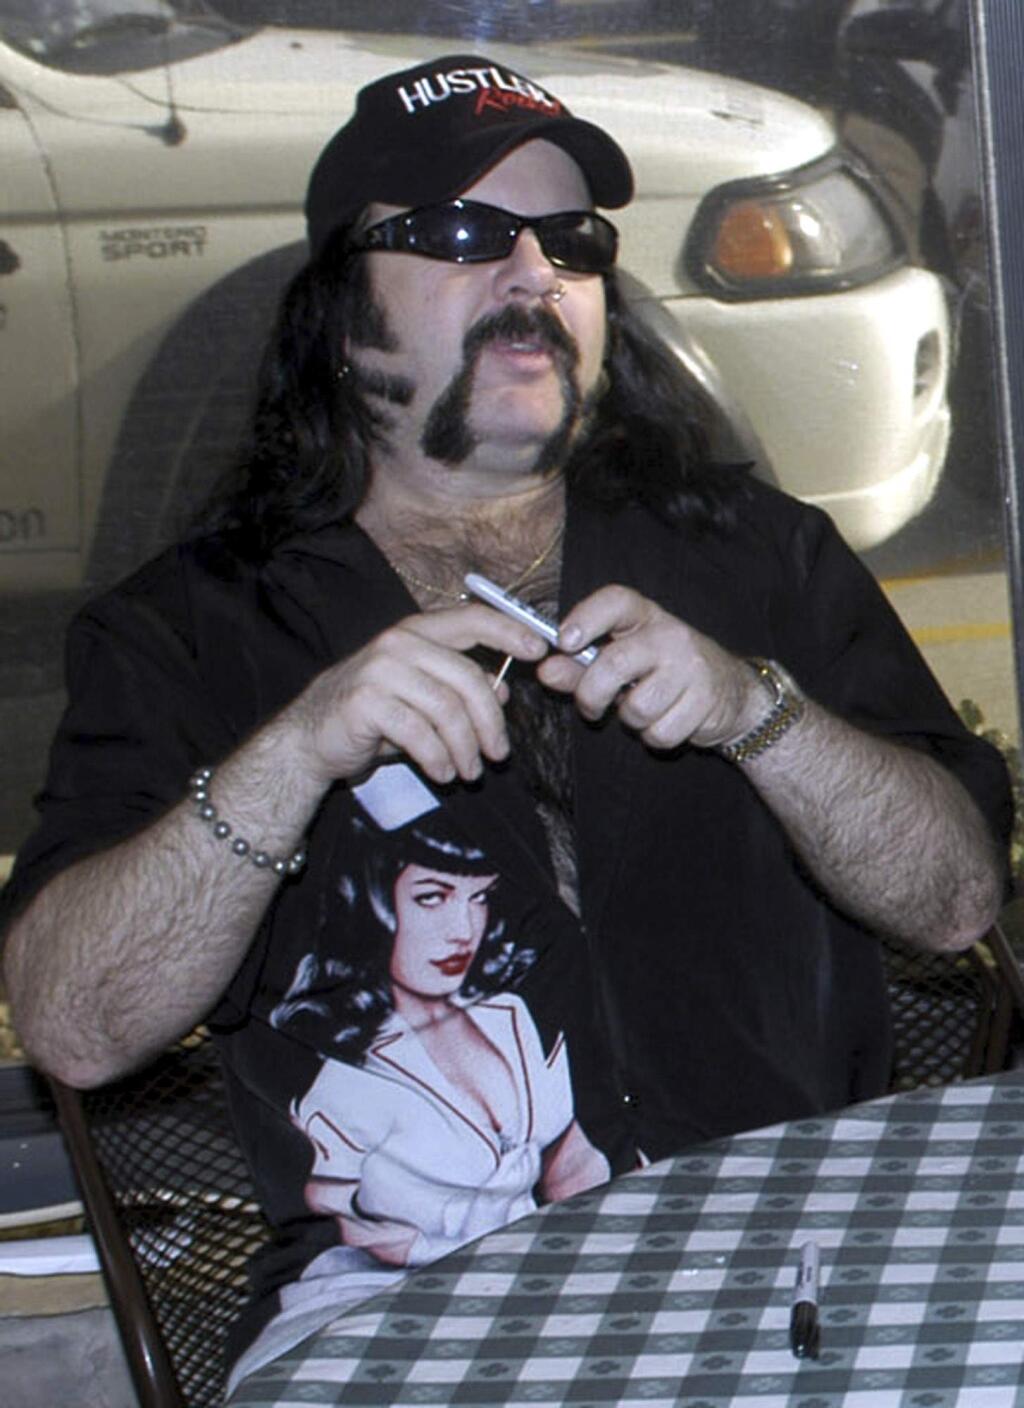 FILE - In this May 20, 2004 file photo shows Vinnie Paul Abbott in Amarillo, Texas. Paul, co-founder and drummer of metal band Pantera, has died at 54. Pantera's official Facebook page posted a statement early Saturday, June 23, 2018 announcing his death. Paul's representative confirmed the death to Billboard. No cause of death was mentioned. Paul's real name was Vincent Paul Abbott. He and his brother, Dimebag Darrell, formed Pantera in 1981.(AP Photo/Ralph Duke, File)